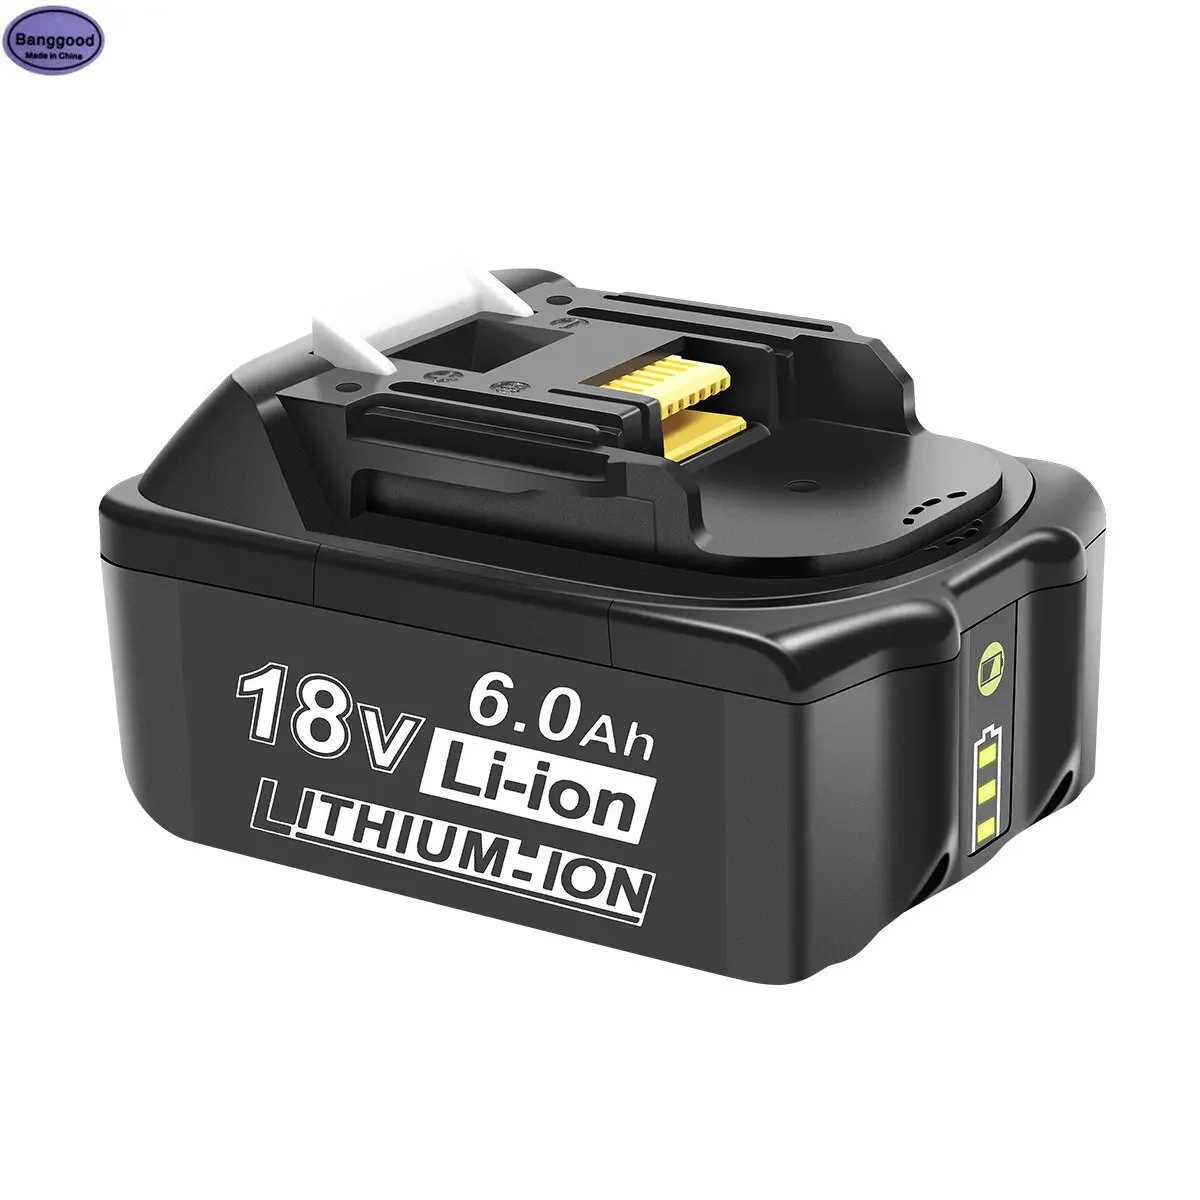 

18V 1.5Ah-6.0Ah Battery Replacement for Makita BL1830 BL1840 BL1850 BL1860 BL1835 194309-1 LXT-400 Cordless Battery Power Tool